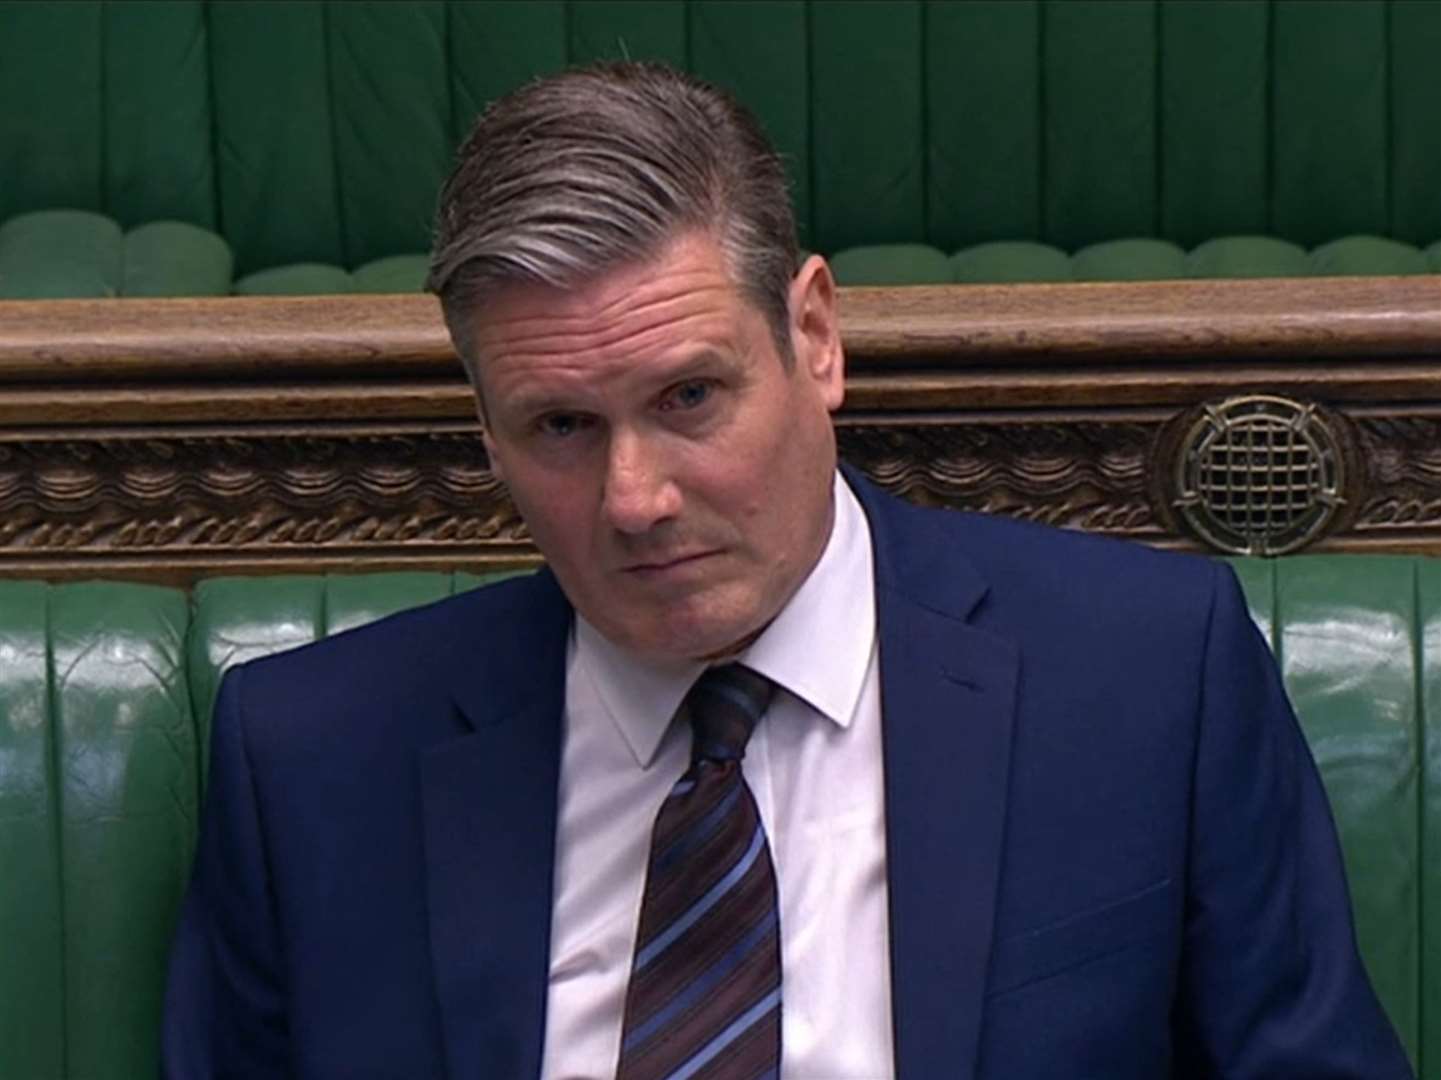 Labour leader Sir Keir Starmer during Prime Minister’s Questions (House of Commons/PA)